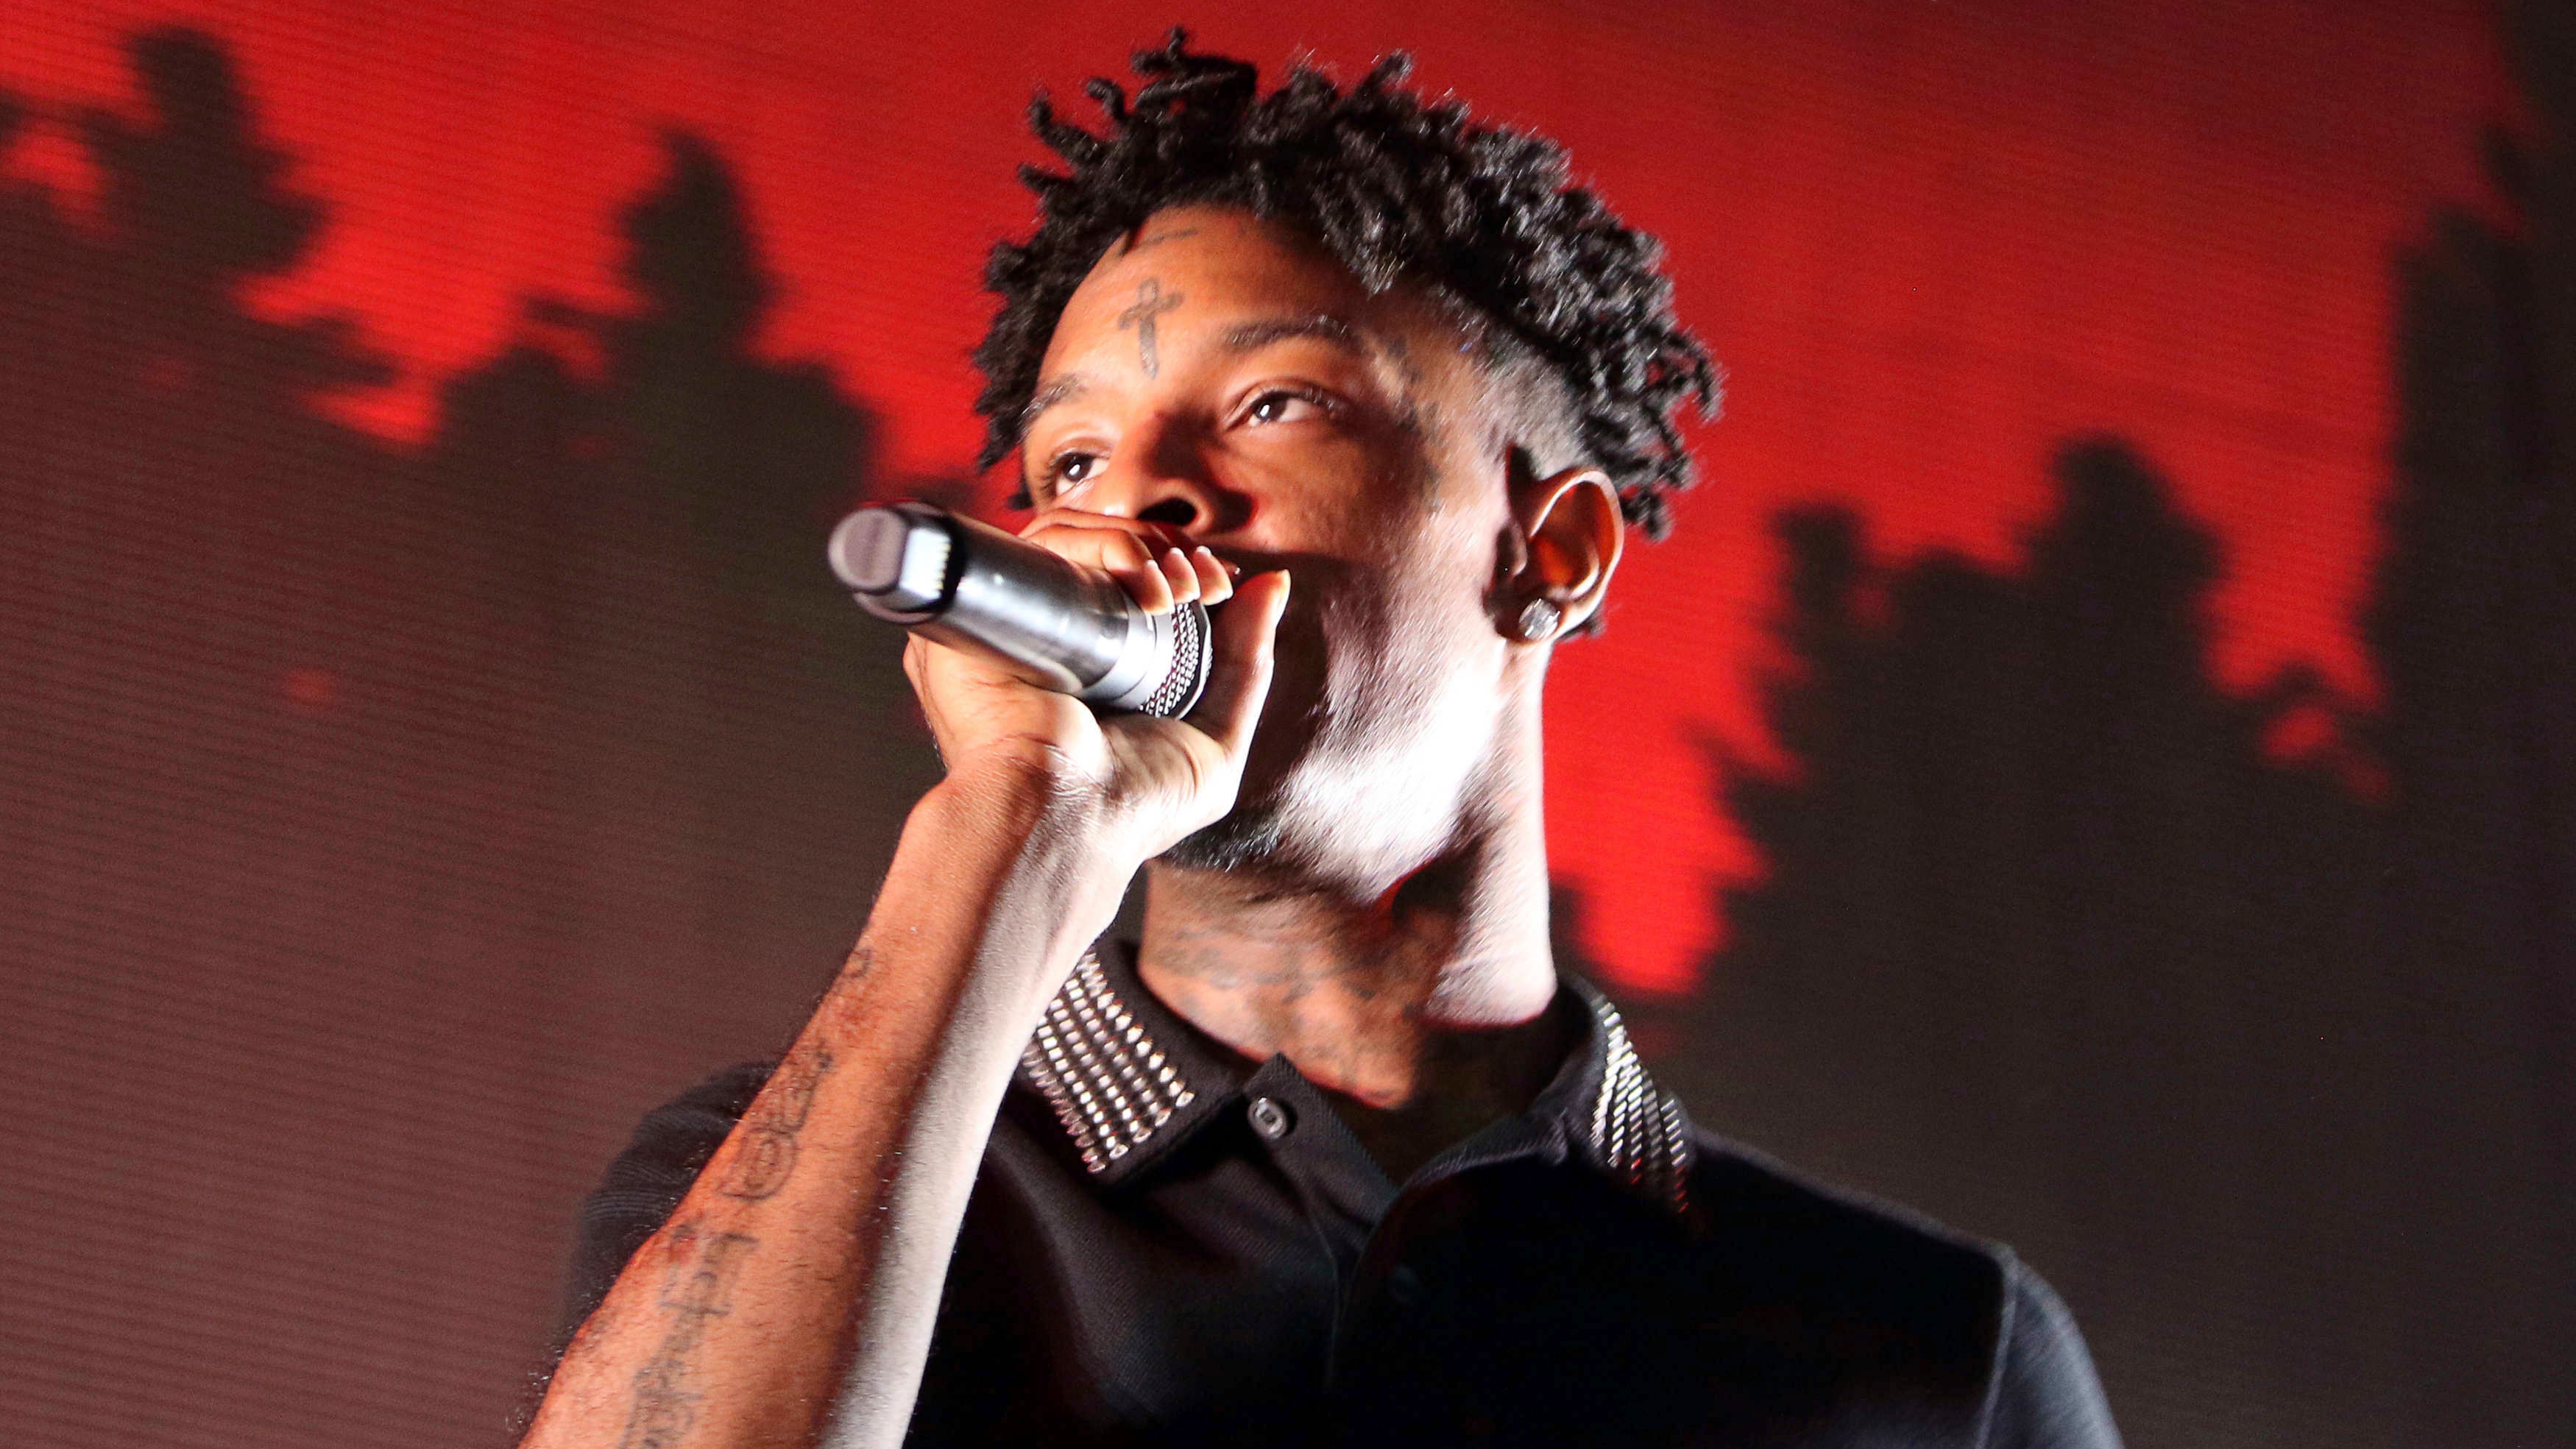 21 Savage Announces Free Financial Literacy Program For Kids From K-12